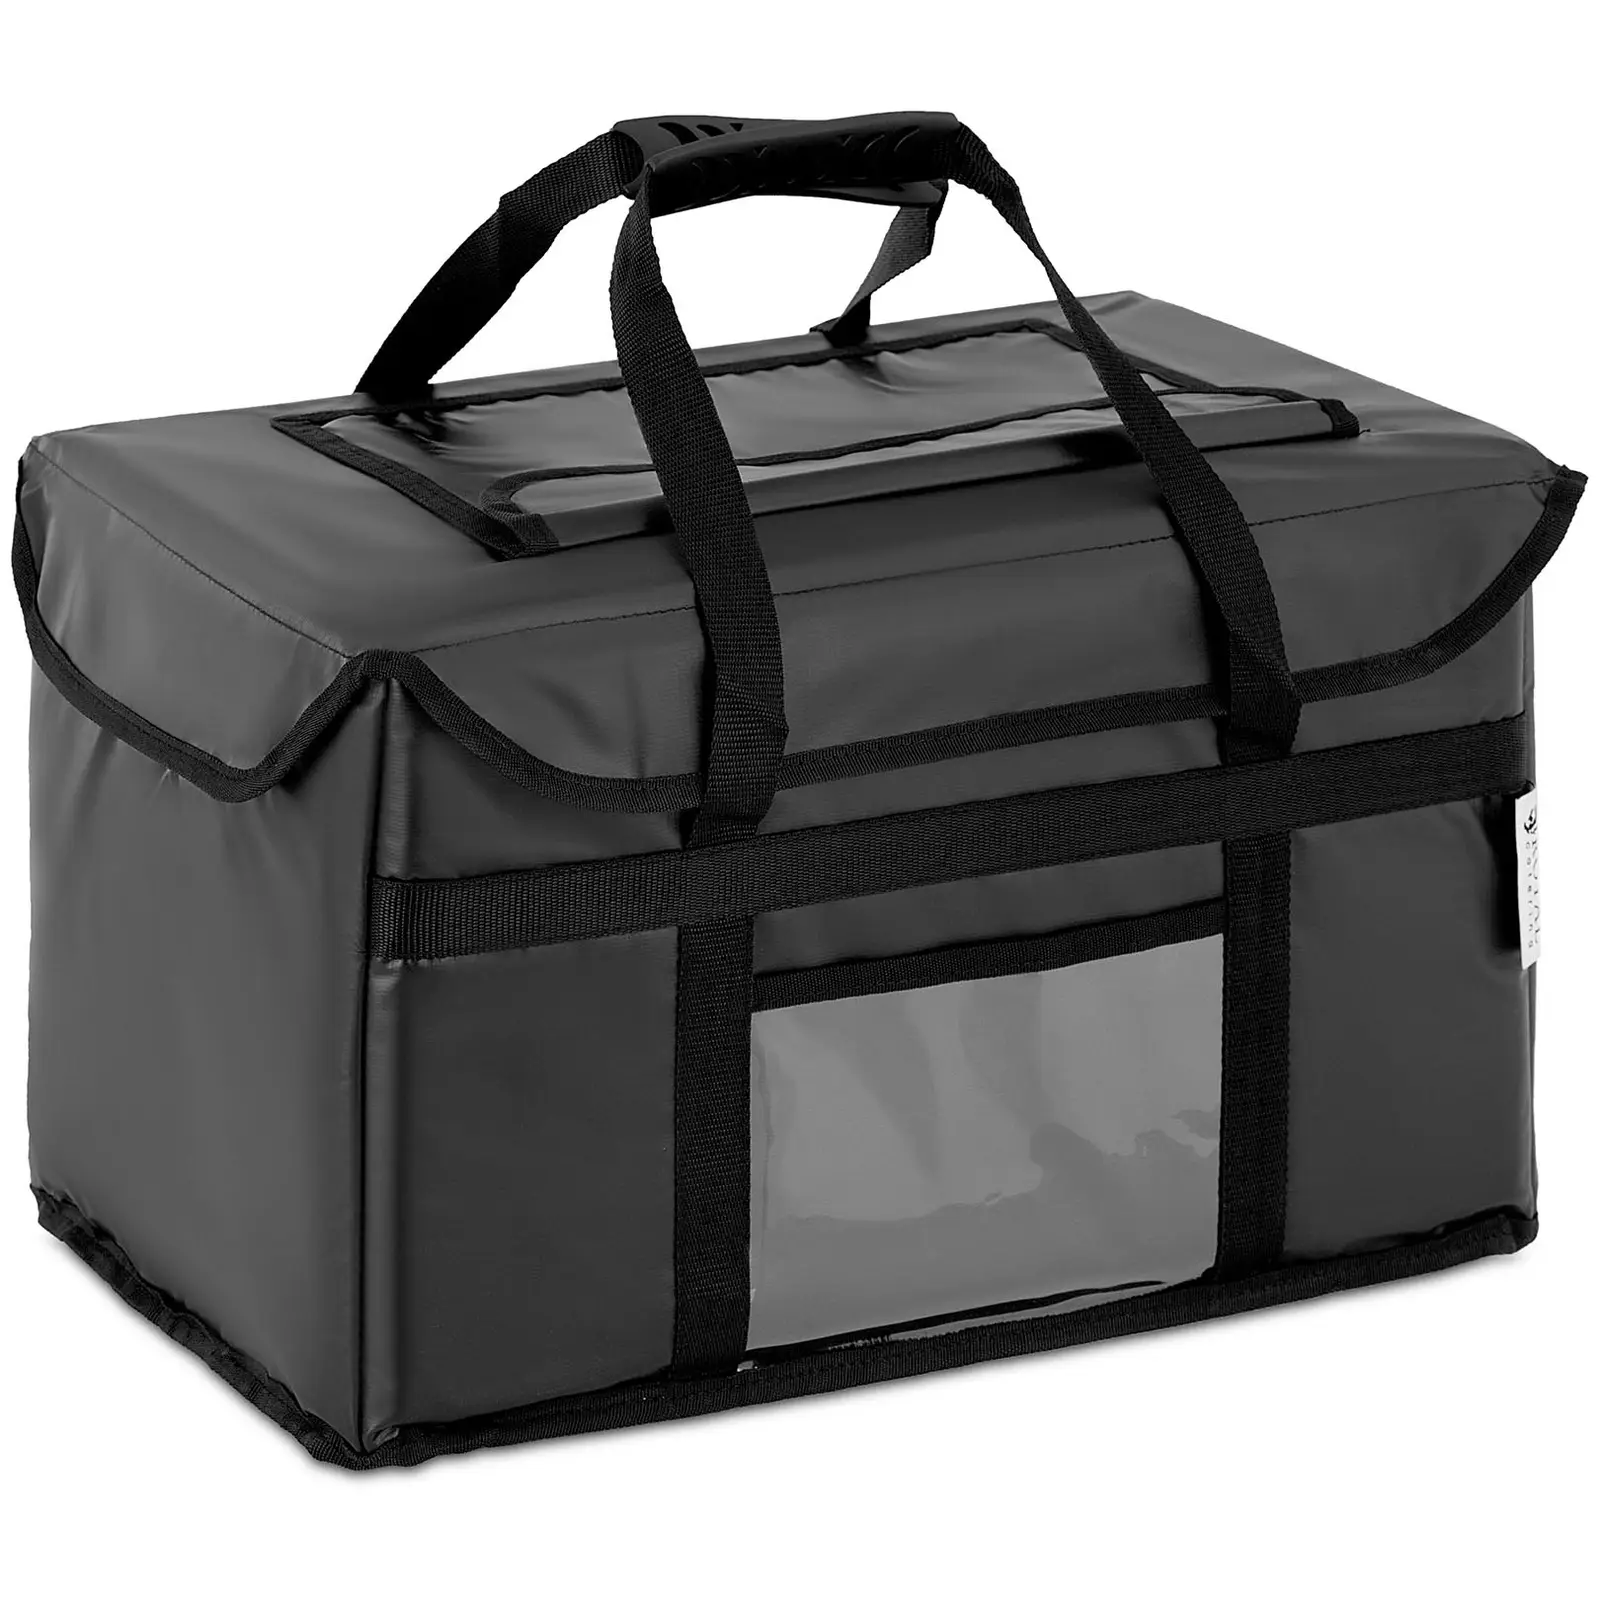 Delivery bag - for food - 44 x 26 x 25 cm - 29 L - black - top loading - Royal Catering